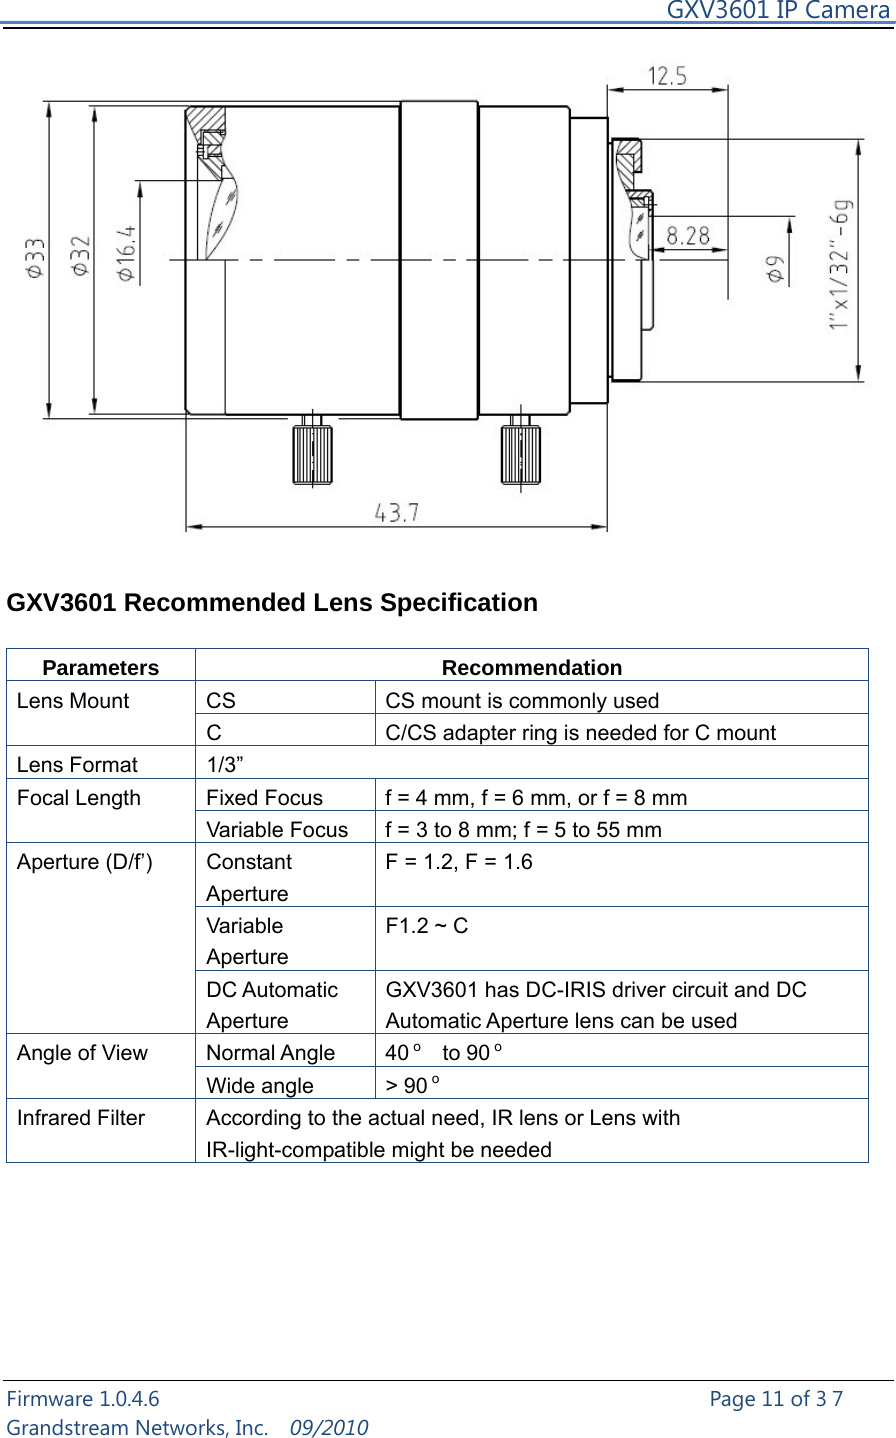     GXV3601 IP Camera Firmware 1.0.4.6                                                   Page 11 of 37     Grandstream Networks, Inc.  09/2010    GXV3601 Recommended Lens Specification   Parameters RecommendationLens Mount  CS  CS mount is commonly used C  C/CS adapter ring is needed for C mount Lens Format  1/3” Focal Length  Fixed Focus  f = 4 mm, f = 6 mm, or f = 8 mm Variable Focus  f = 3 to 8 mm; f = 5 to 55 mm Aperture (D/f’)  Constant Aperture F = 1.2, F = 1.6 Variable Aperture F1.2 ~ C DC Automatic Aperture  GXV3601 has DC-IRIS driver circuit and DC Automatic Aperture lens can be used Angle of View  Normal Angle  40 o  to 90 o Wide angle &gt; 90 oInfrared Filter  According to the actual need, IR lens or Lens with IR-light-compatible might be needed         